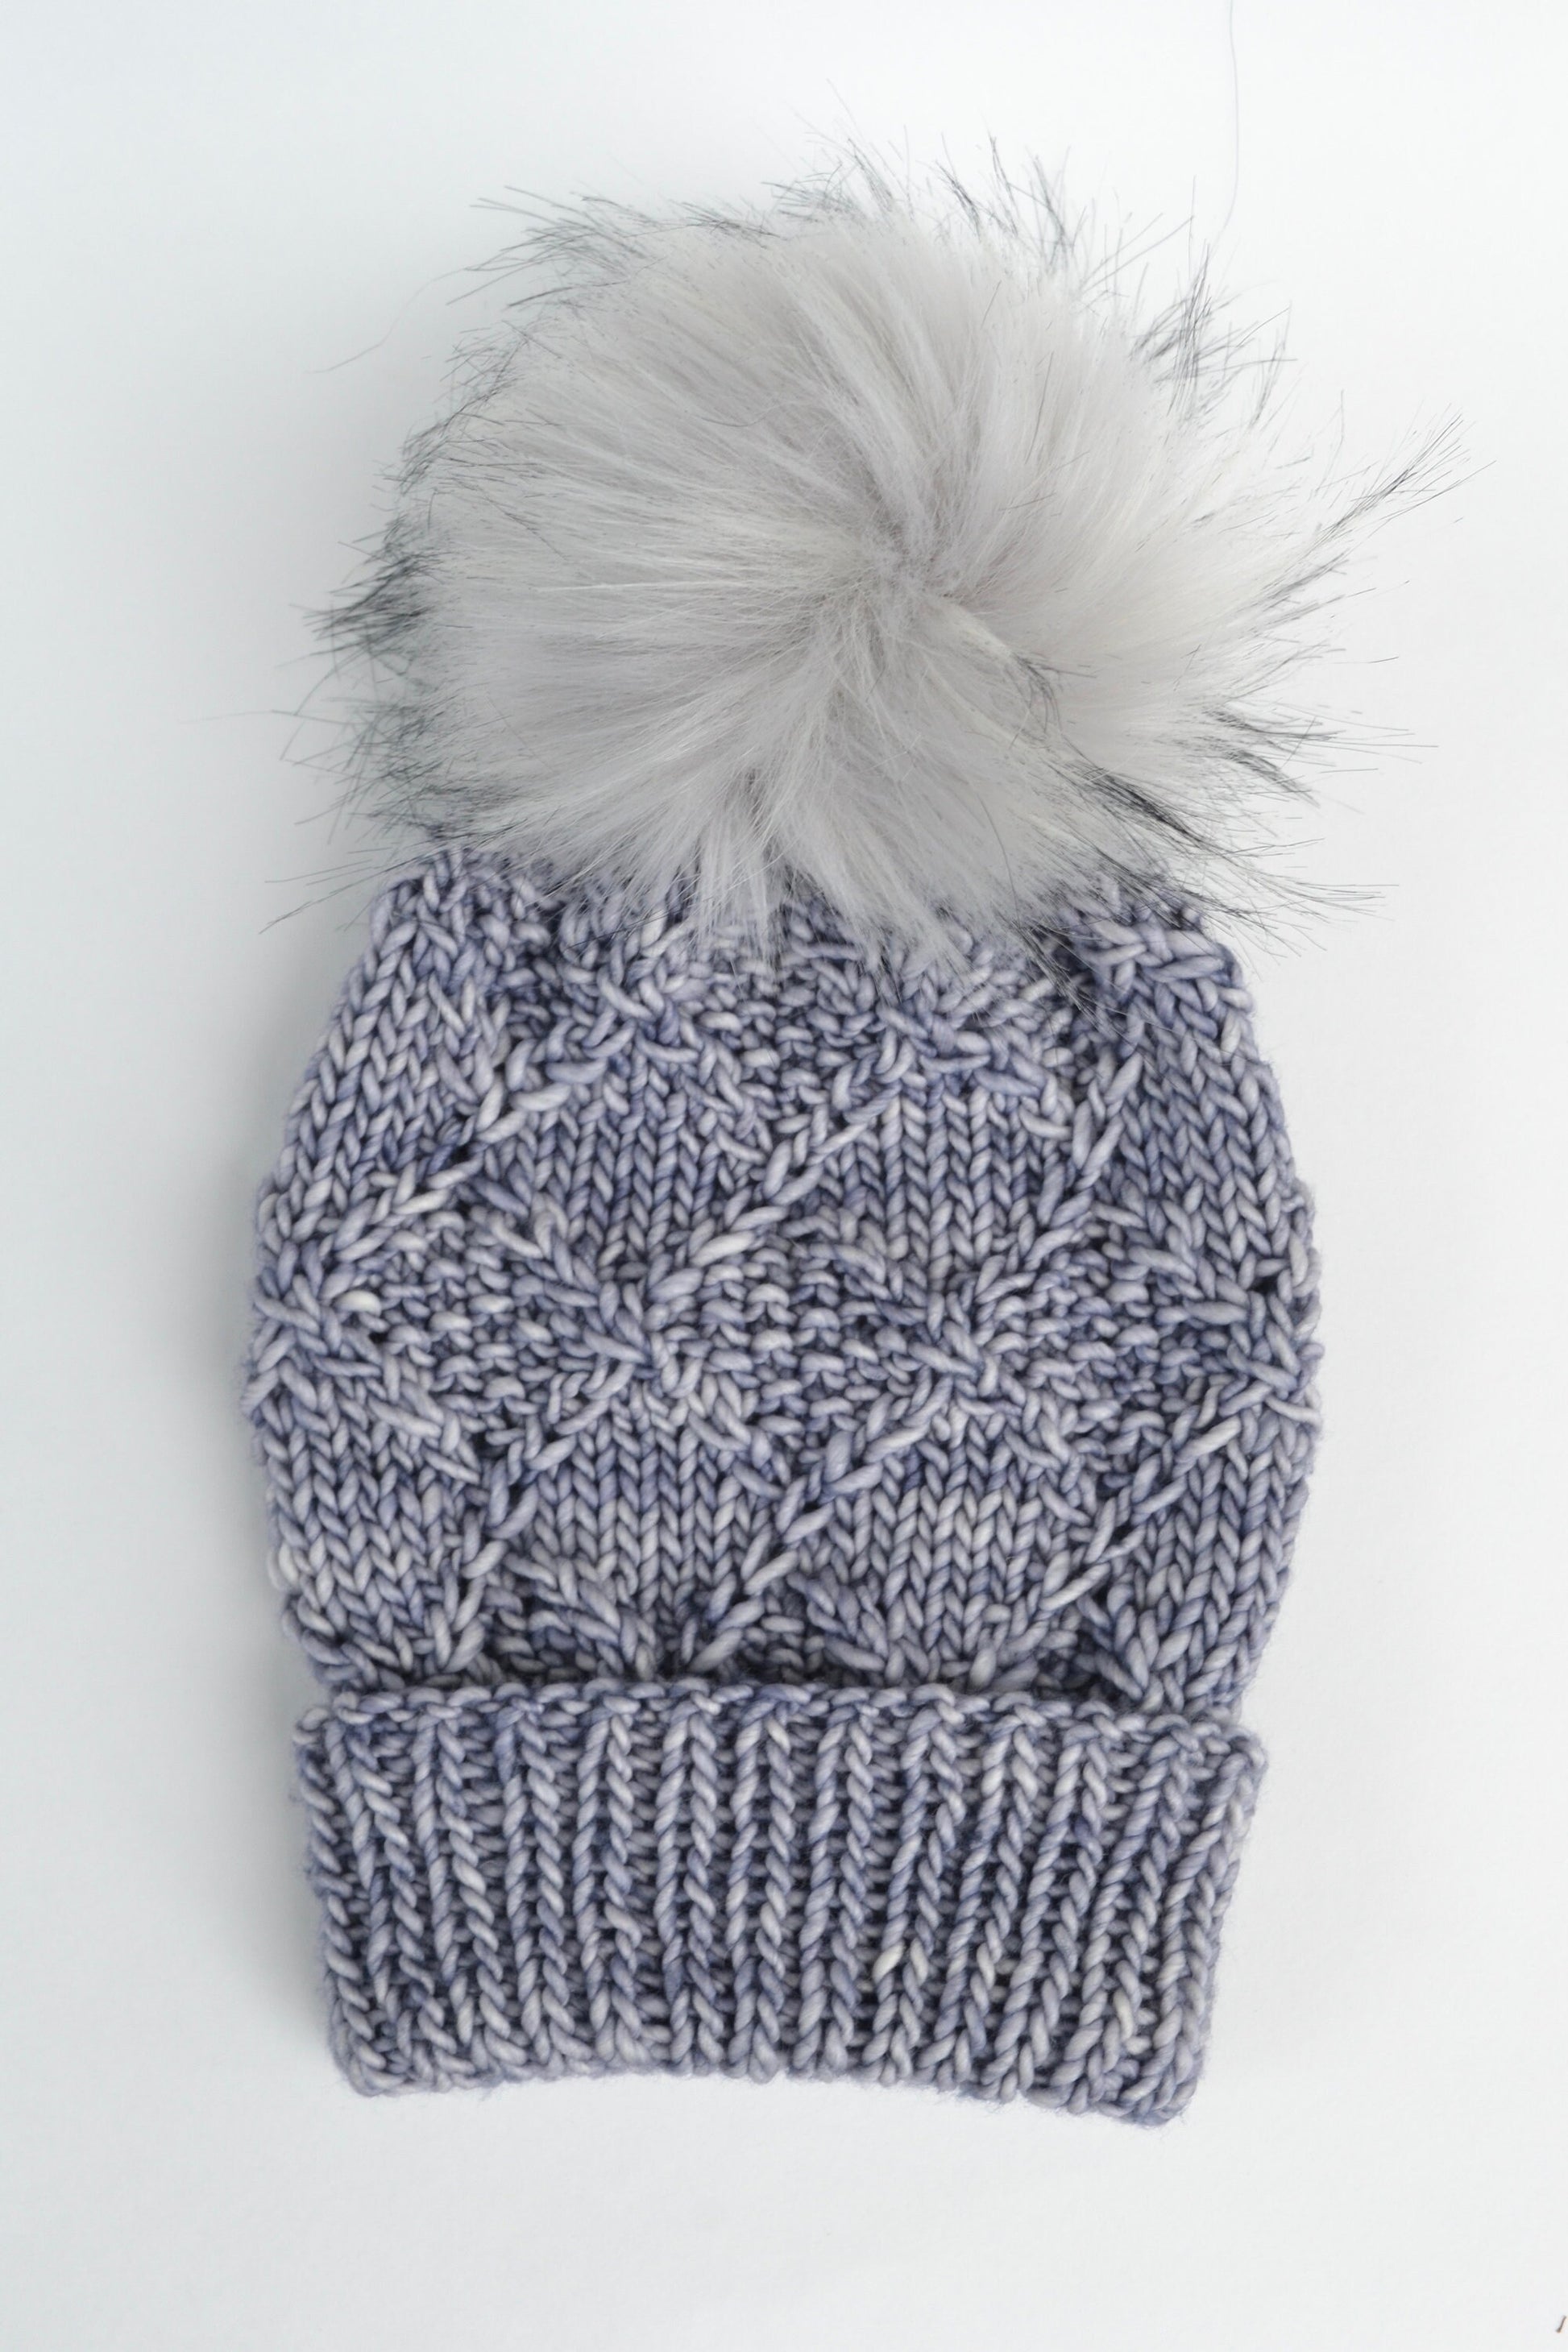 KNITTING PATTERN: North Loop Beanie | Cable Knit Hat Pattern | Bulky Yarn Knitting Pattern